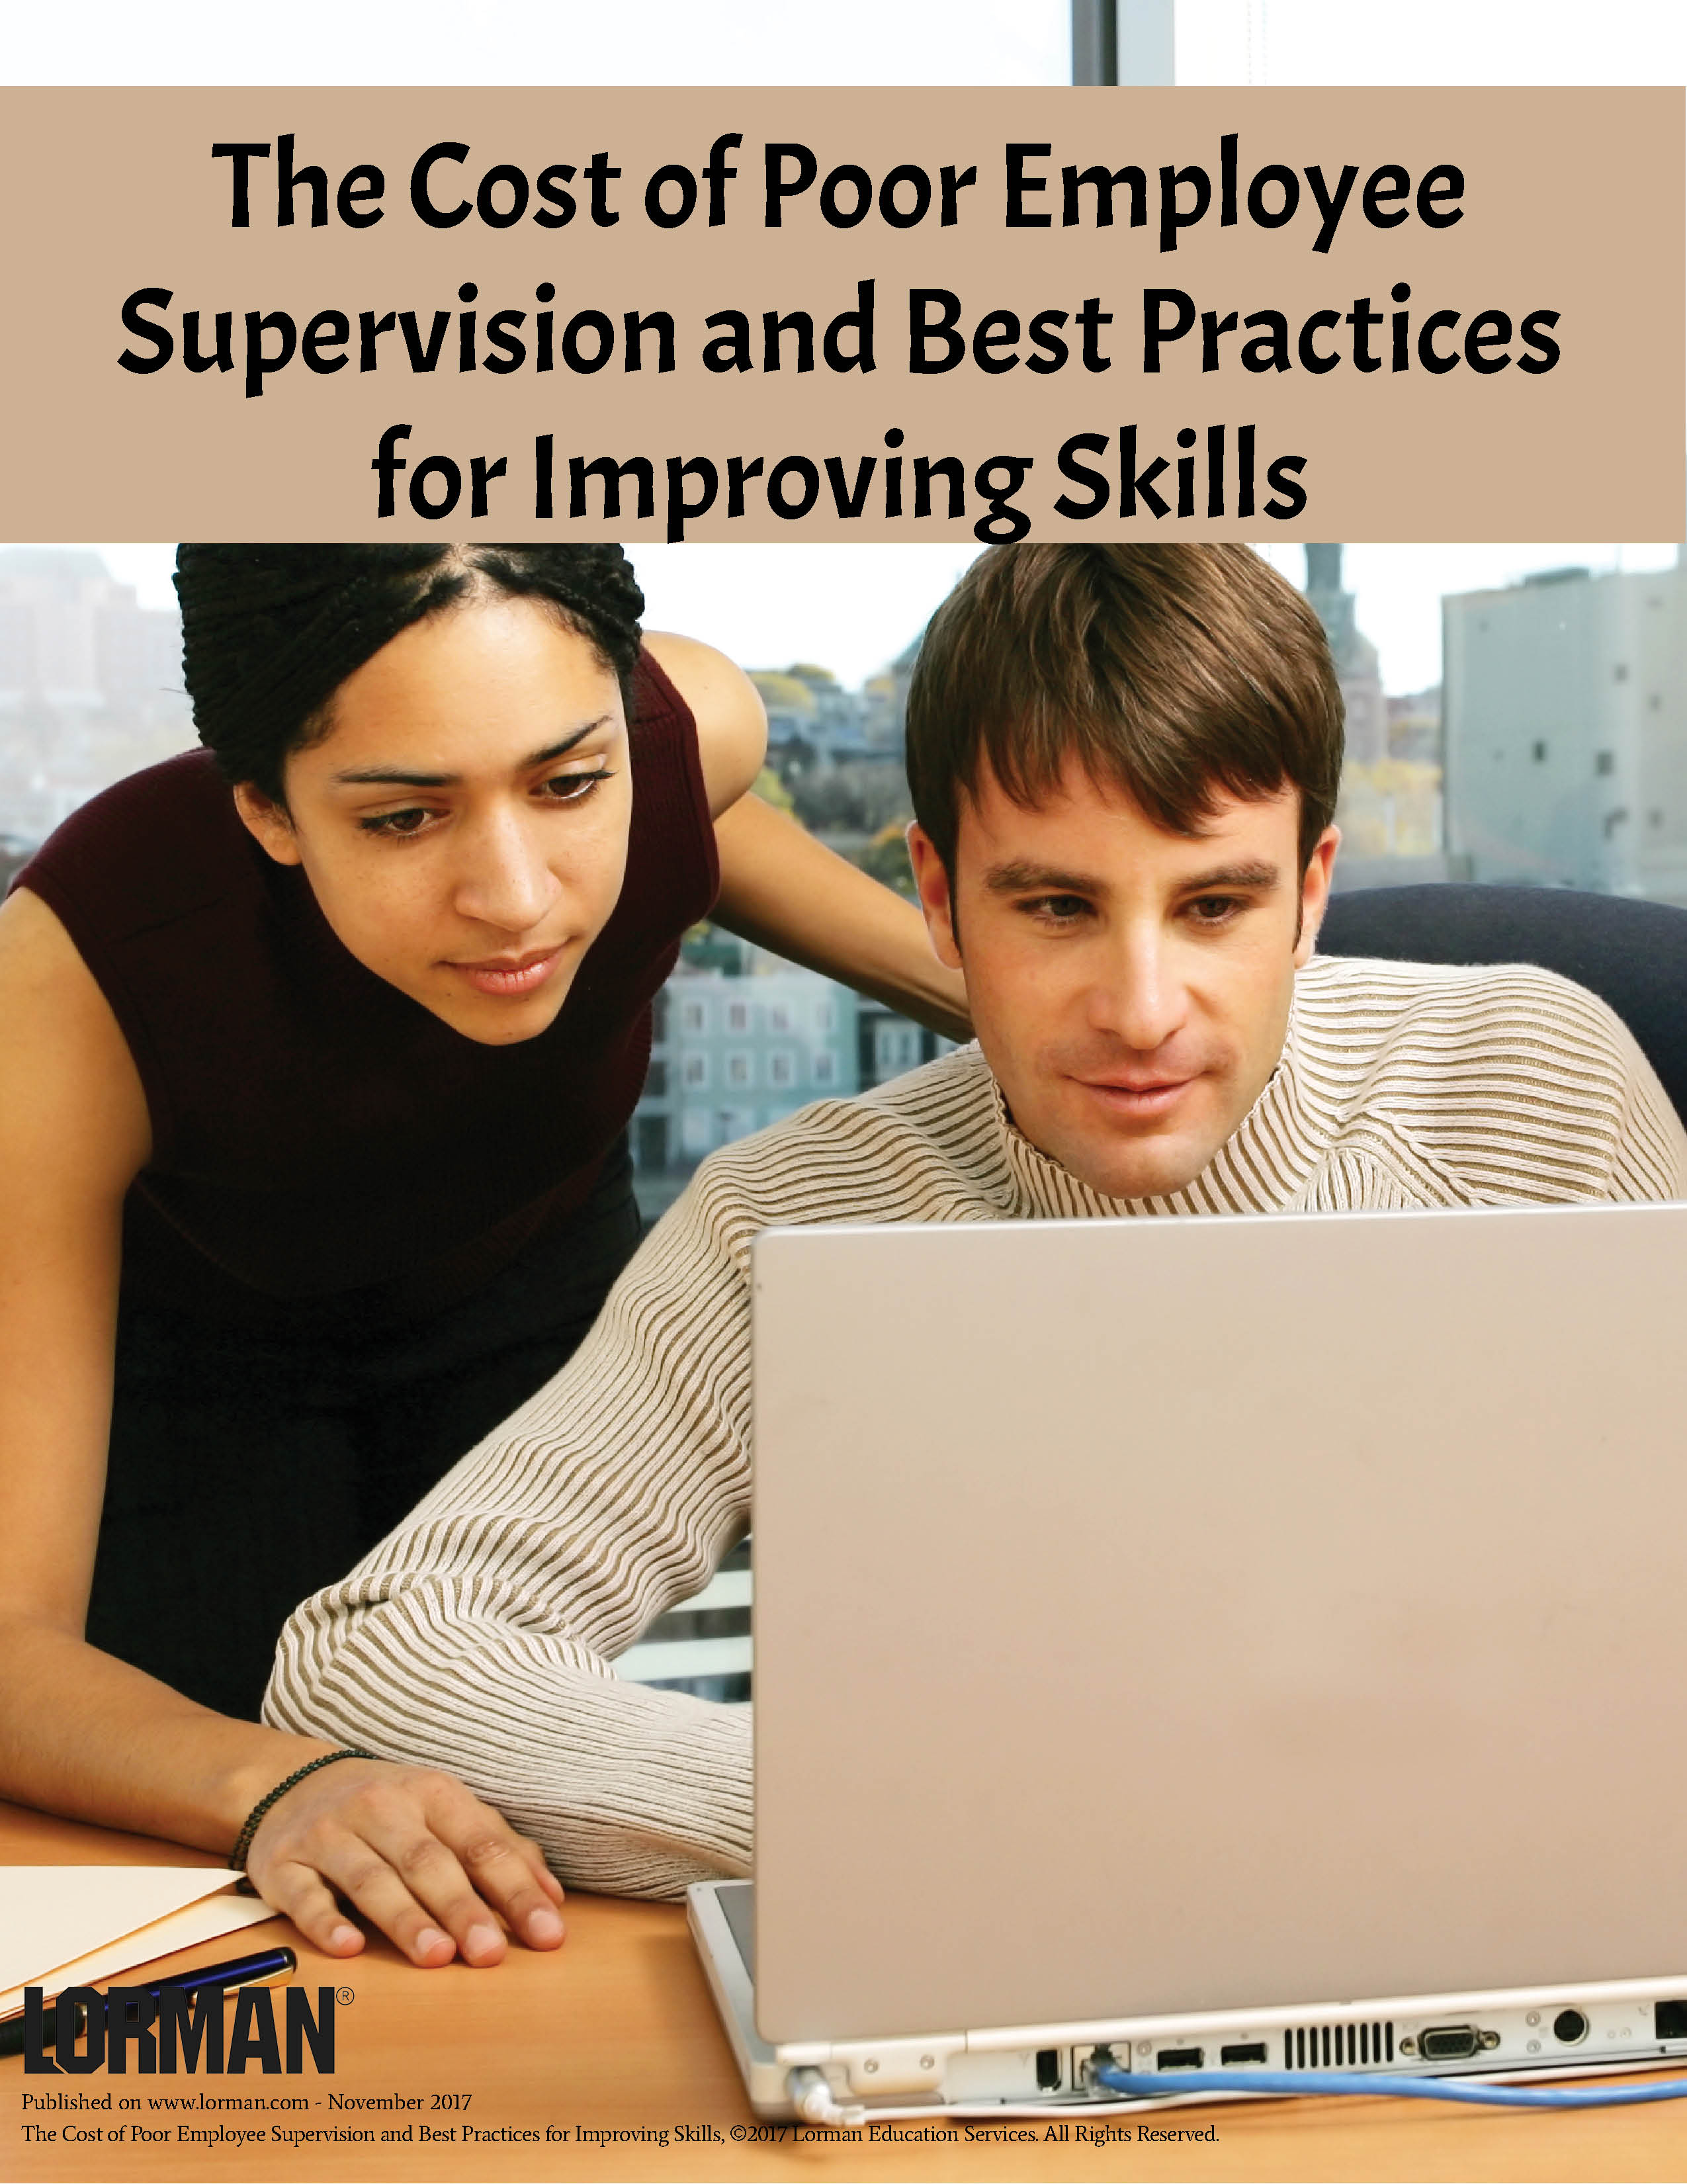 The Cost of Poor Employee Supervision and Best Practices for Improving Skills